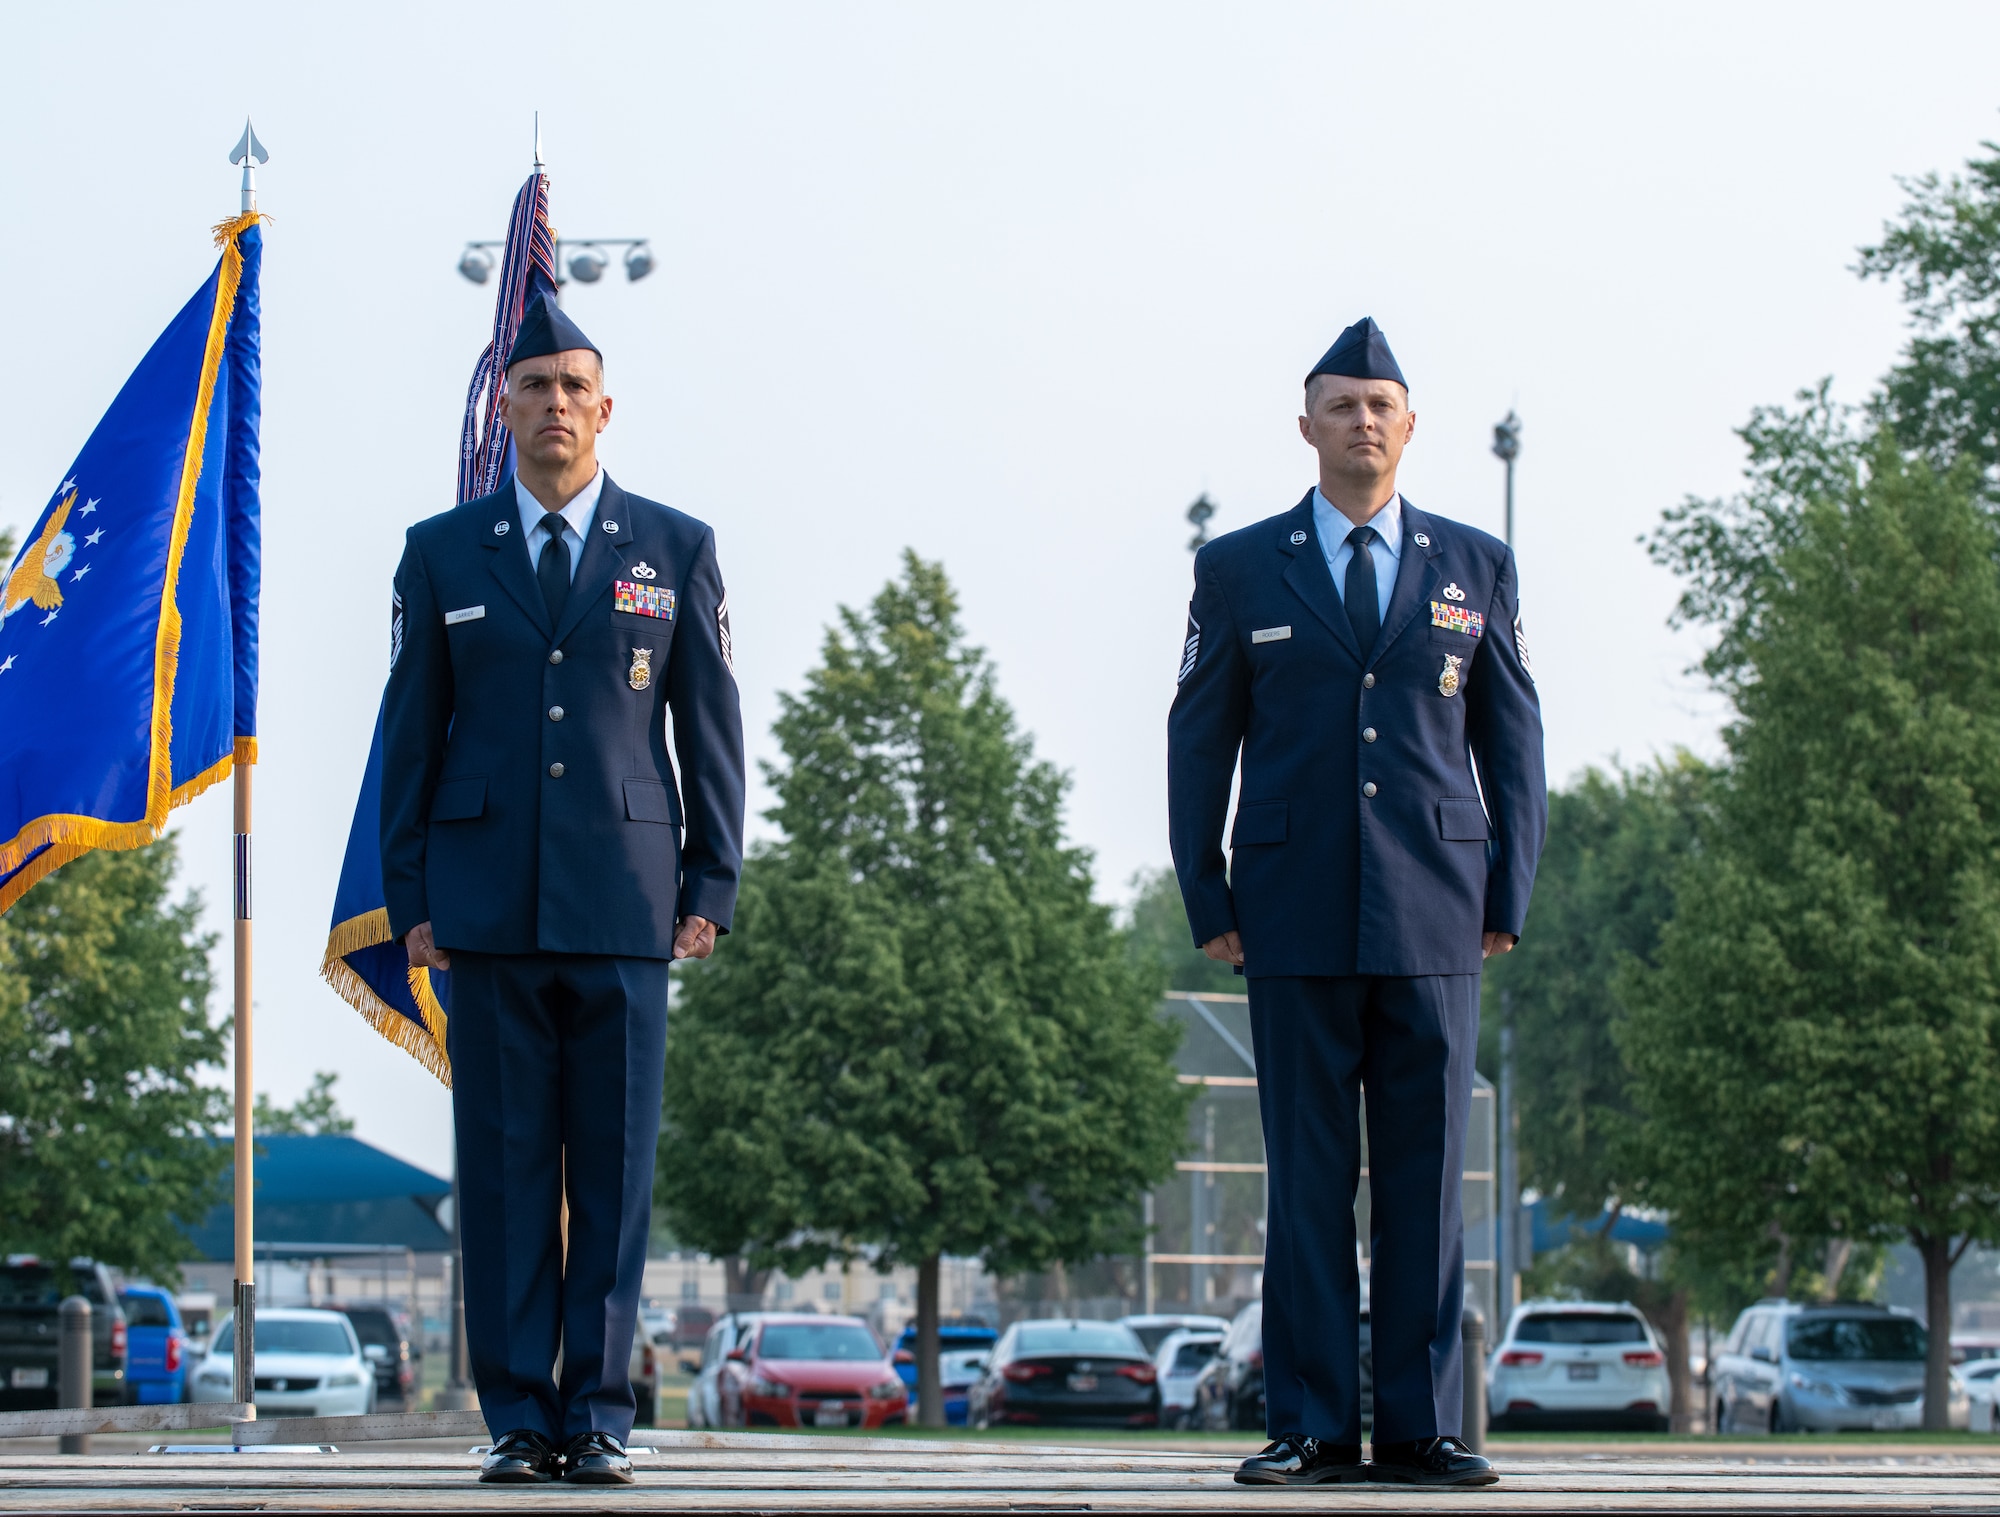 U.S. Air Force Senior Master Sgt. Chad Carrier (left) and Master Sgt. Justin Rogers, 419th Civil Engineer Squadron, stand at attention during a ceremony where they were awarded the Airman’s Medal at Hill Air Force Base, Utah on July 11, 2021. Carrier and Rogers displayed exemplary heroism actions when they saved the life of a trapped driver by pulling him from a burning vehicle.